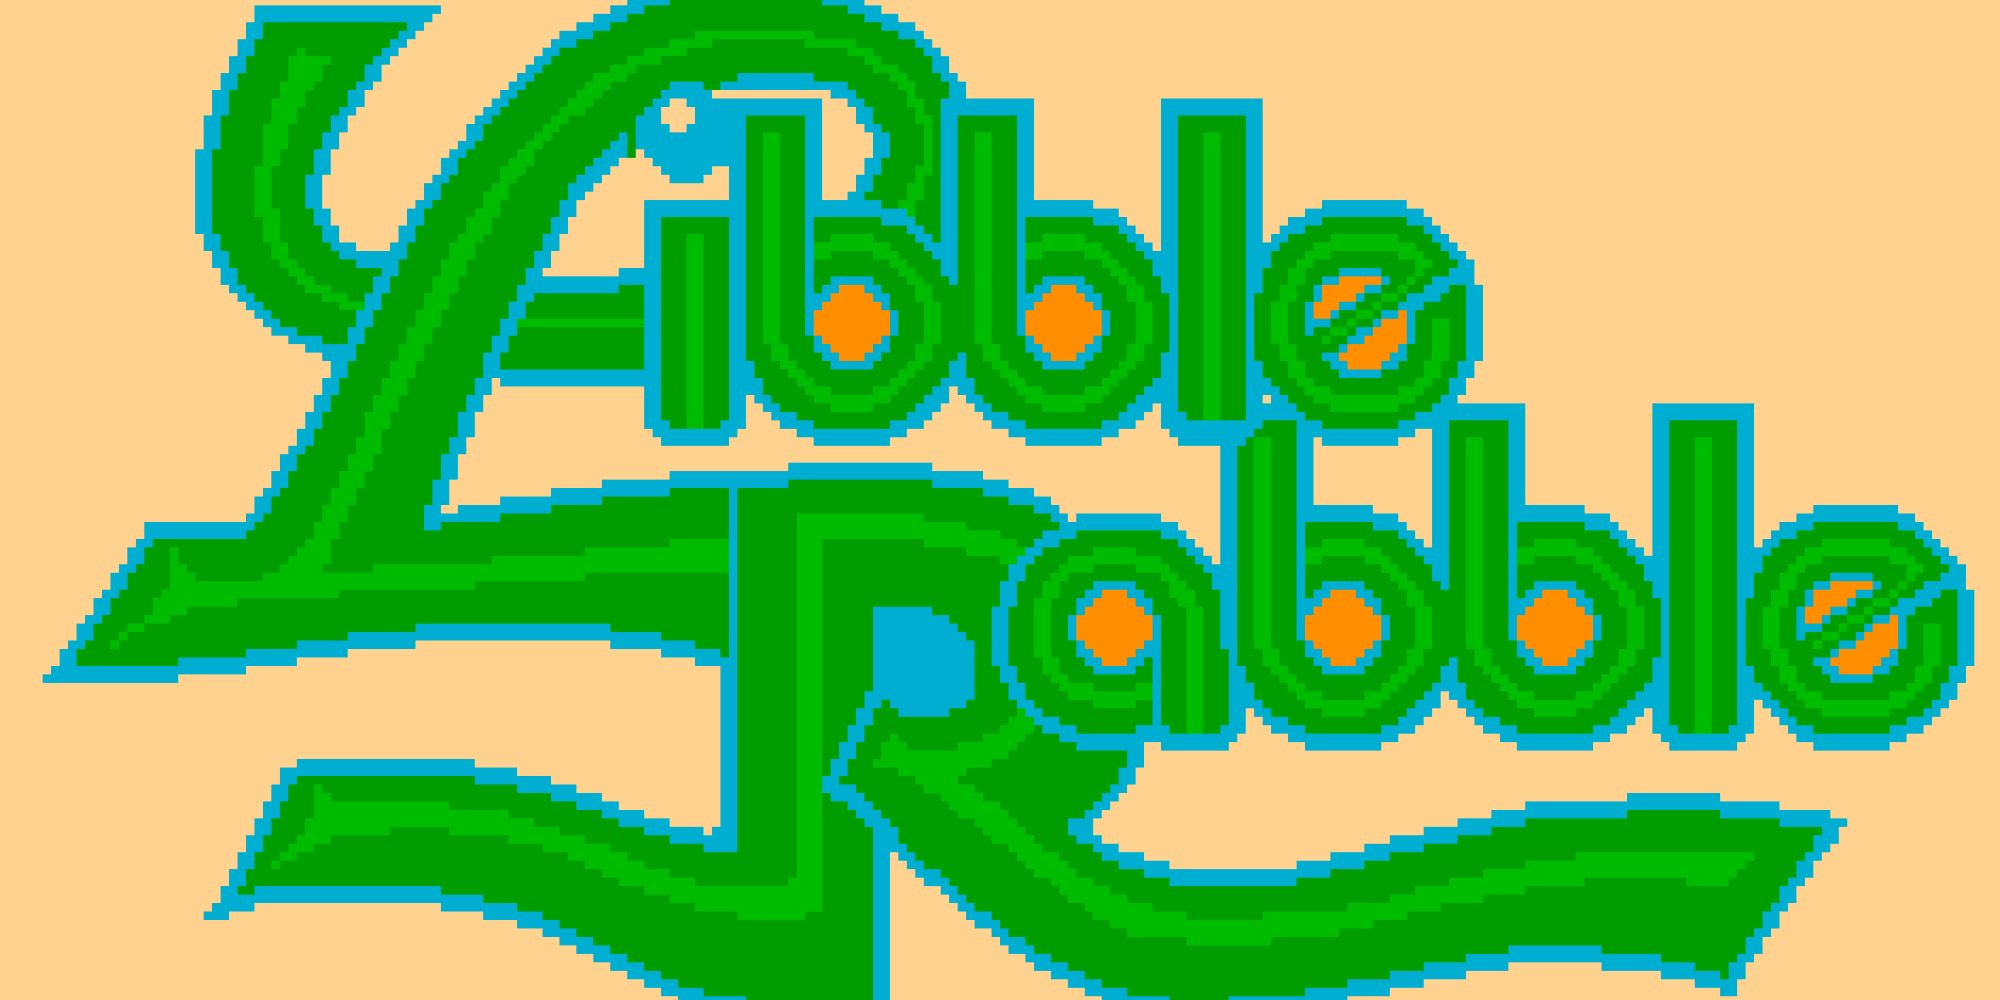 A screenshot of Libble Rabble's title screen, showing the name of the game in curly green cursive